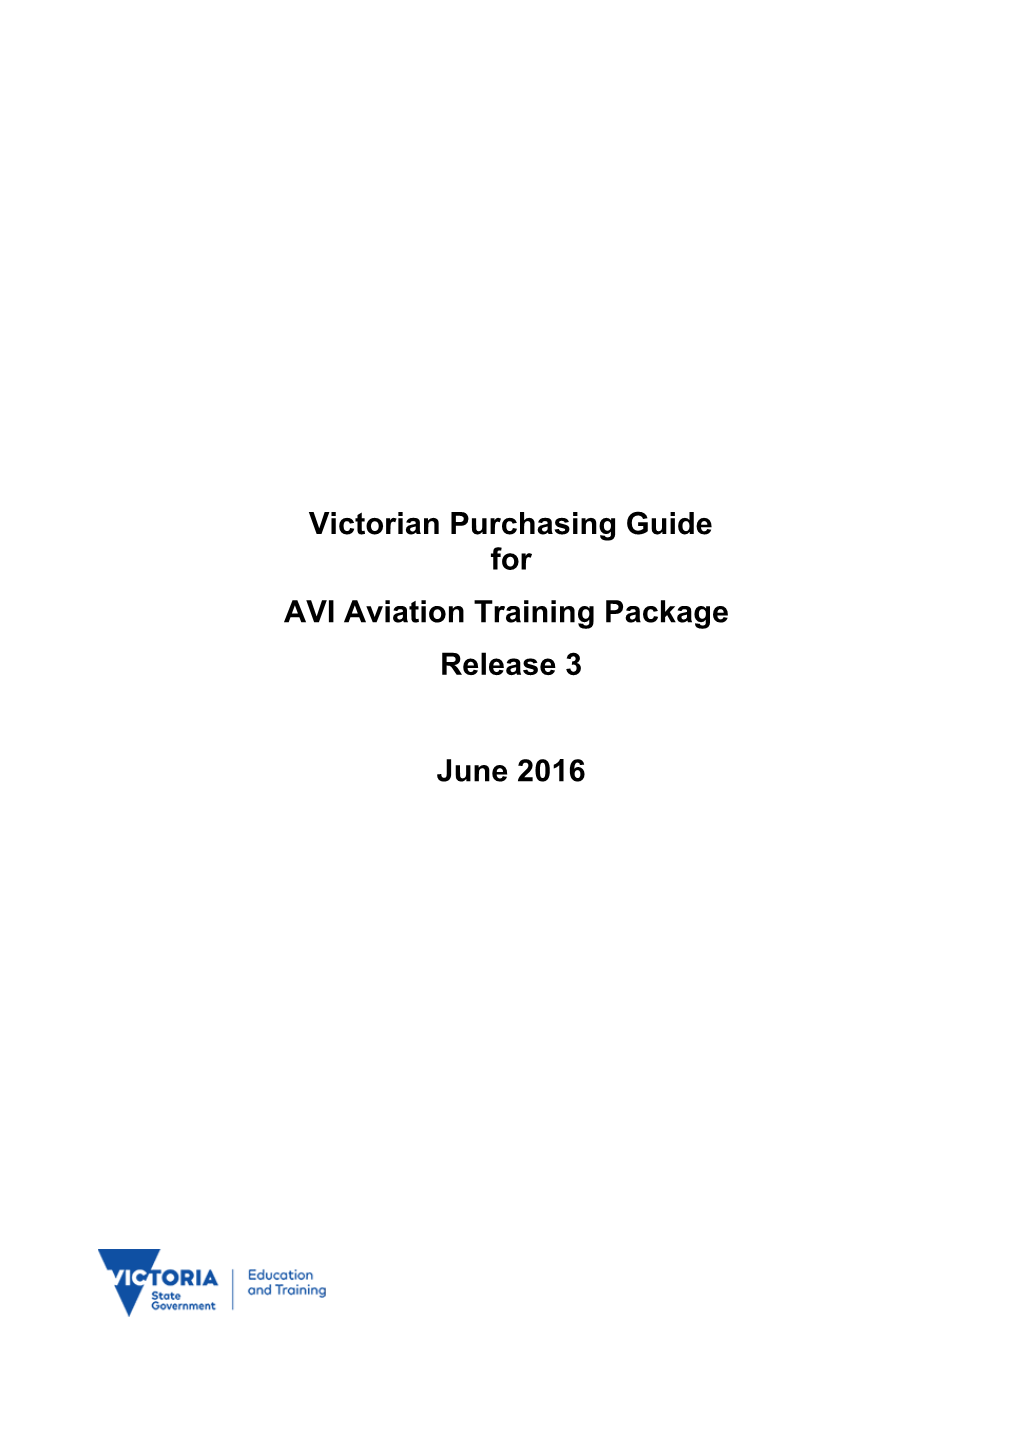 Victorian Purchasing Guide for AVI Aviation Release 1